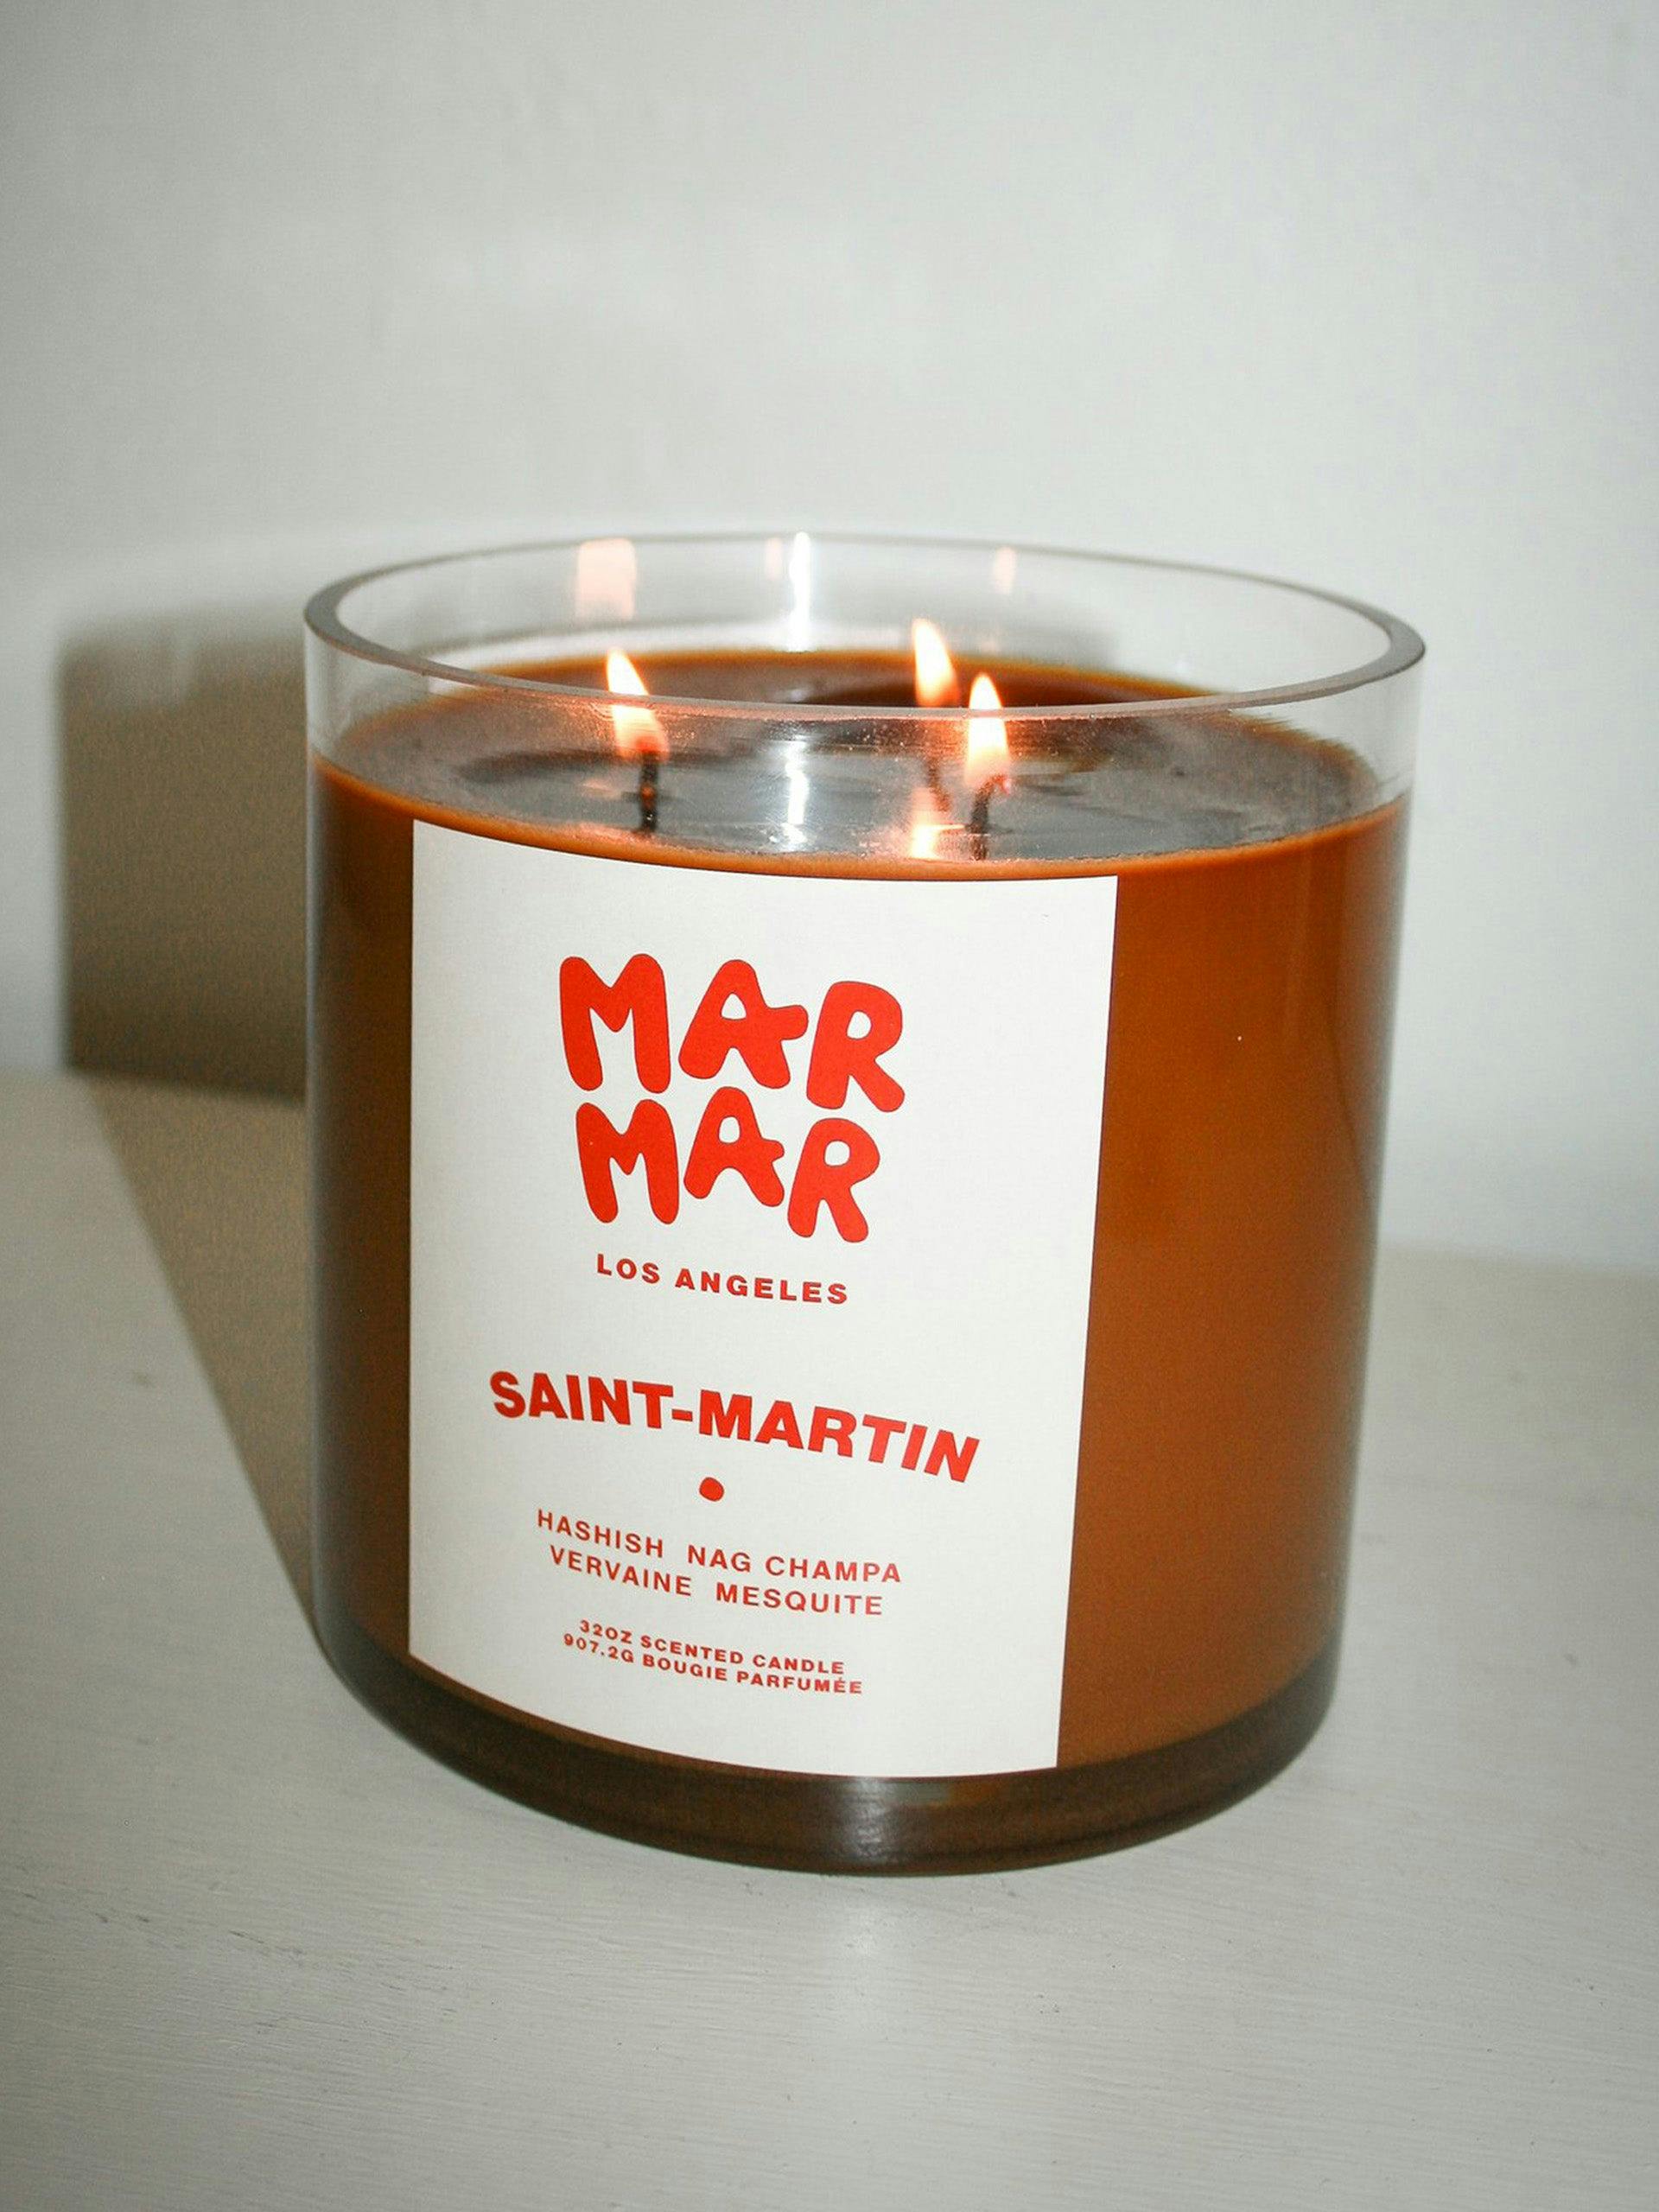 Saint-Martin scented candle